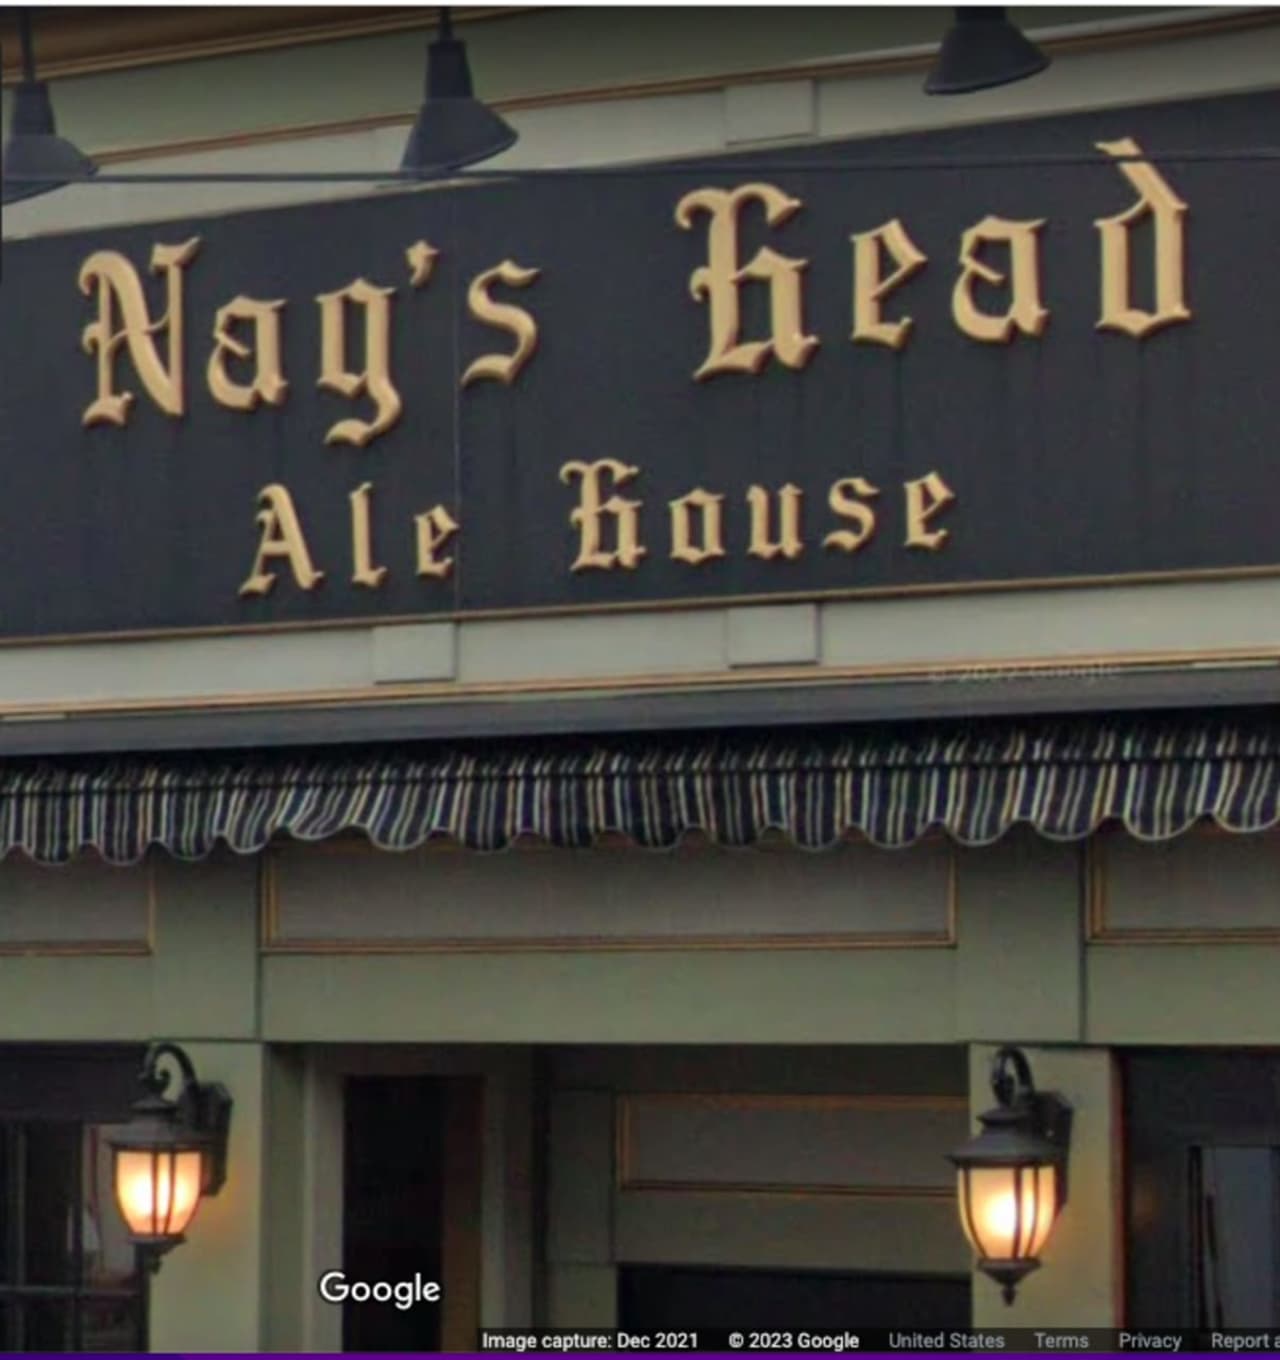 Nag’s Head Ale House, located at 396 New York Ave., in Huntington.